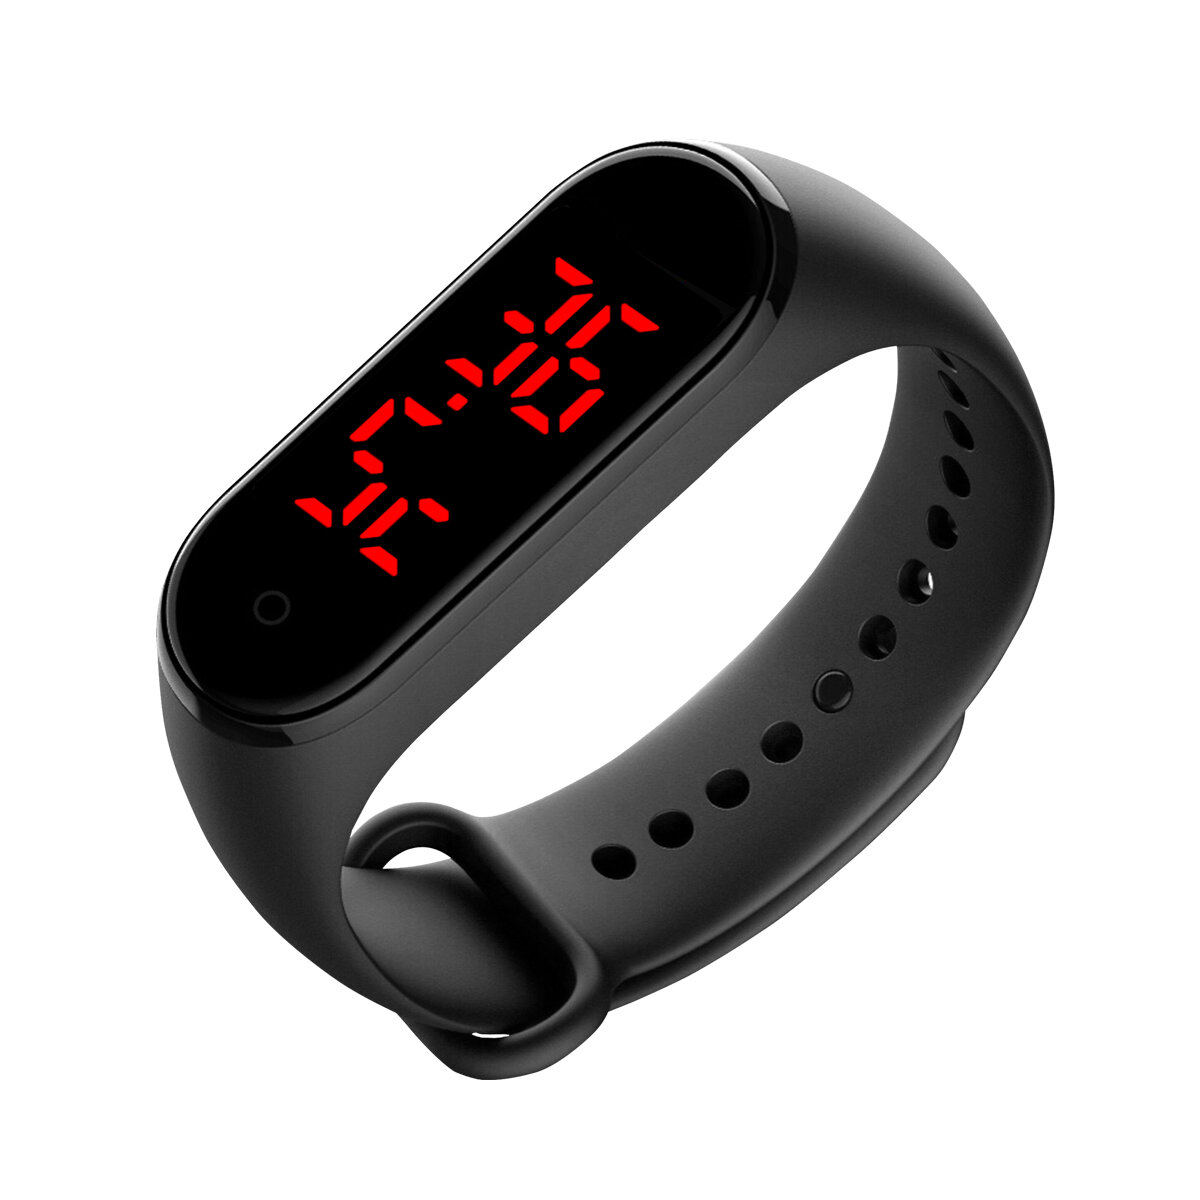 

Bakeey V8 Body Temperature Measurement LED Monitor Health Care Smart Watch Wristband